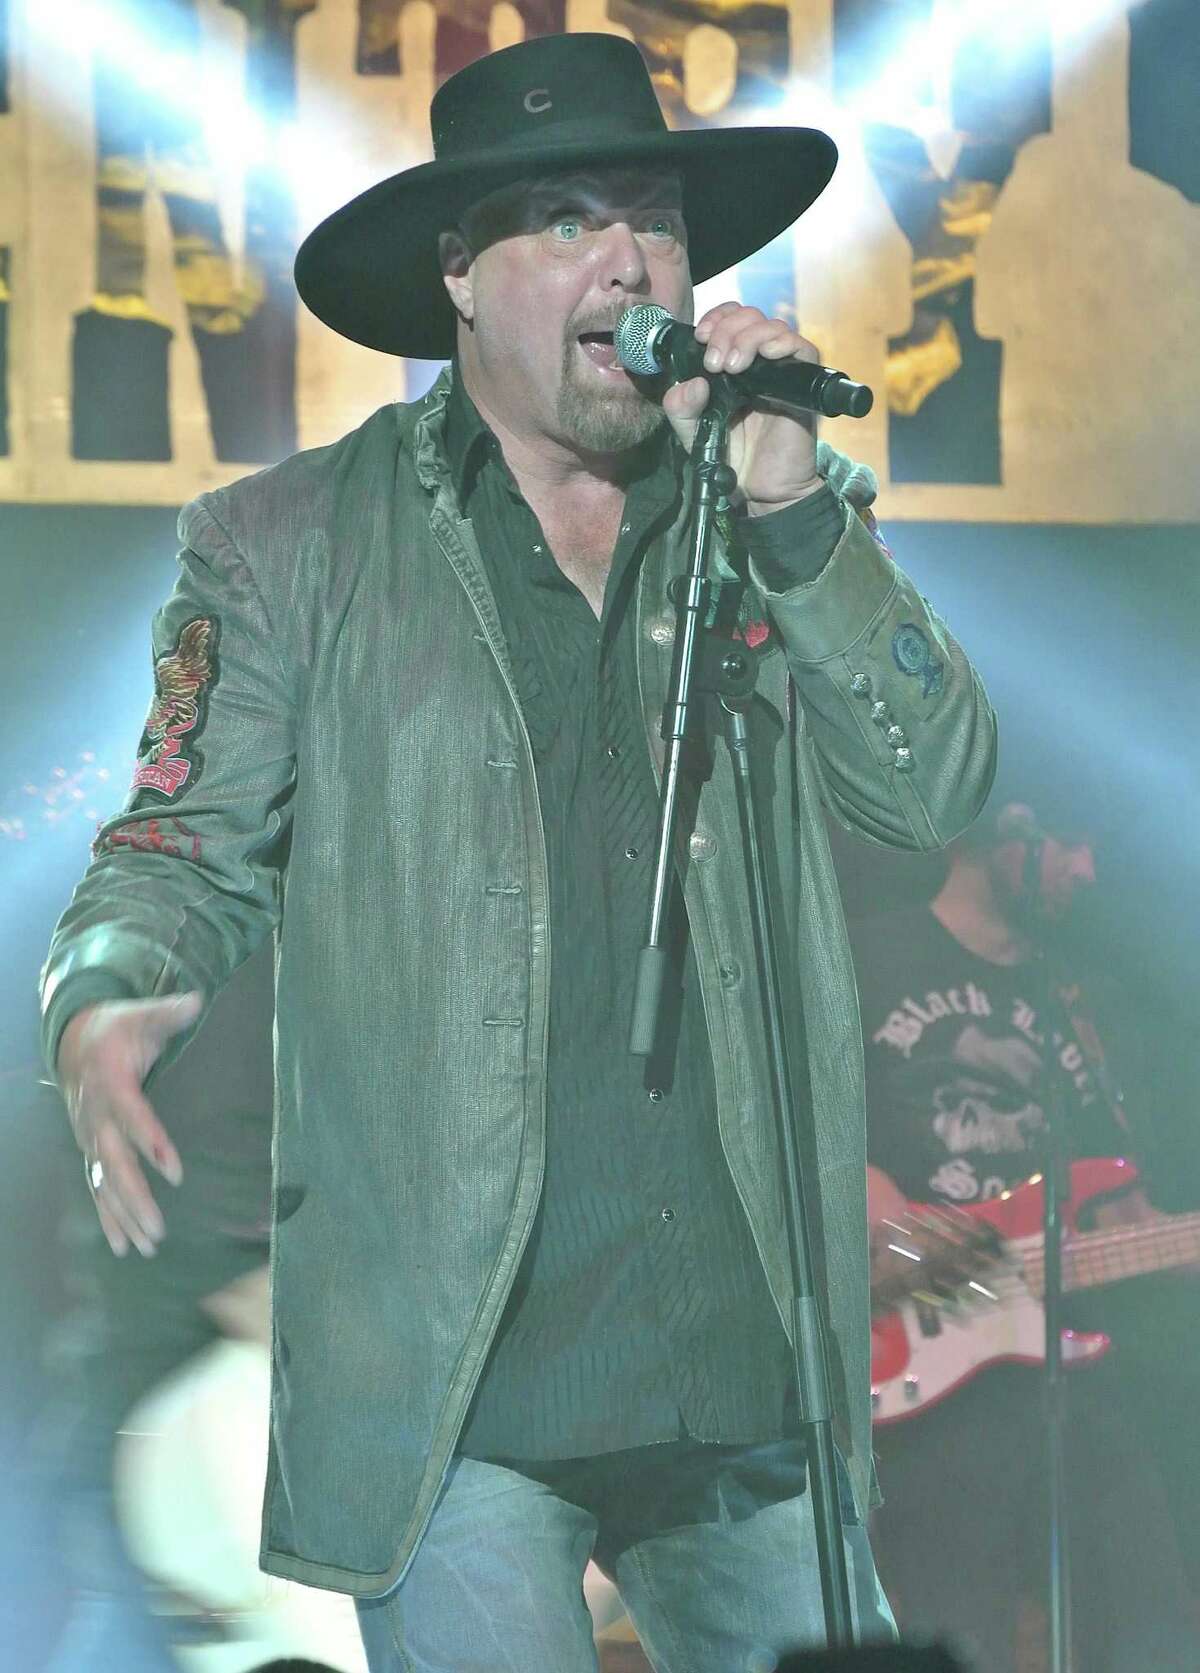 Friday, Eddie Montgomery of legendary country duo Montgomery Gentry performs at the Ridgefield Playhouse at 8 p.m. Tickets can be purchased here. (Photo Credits: Smallpix, © Smallpix/Splash News/Corbis)